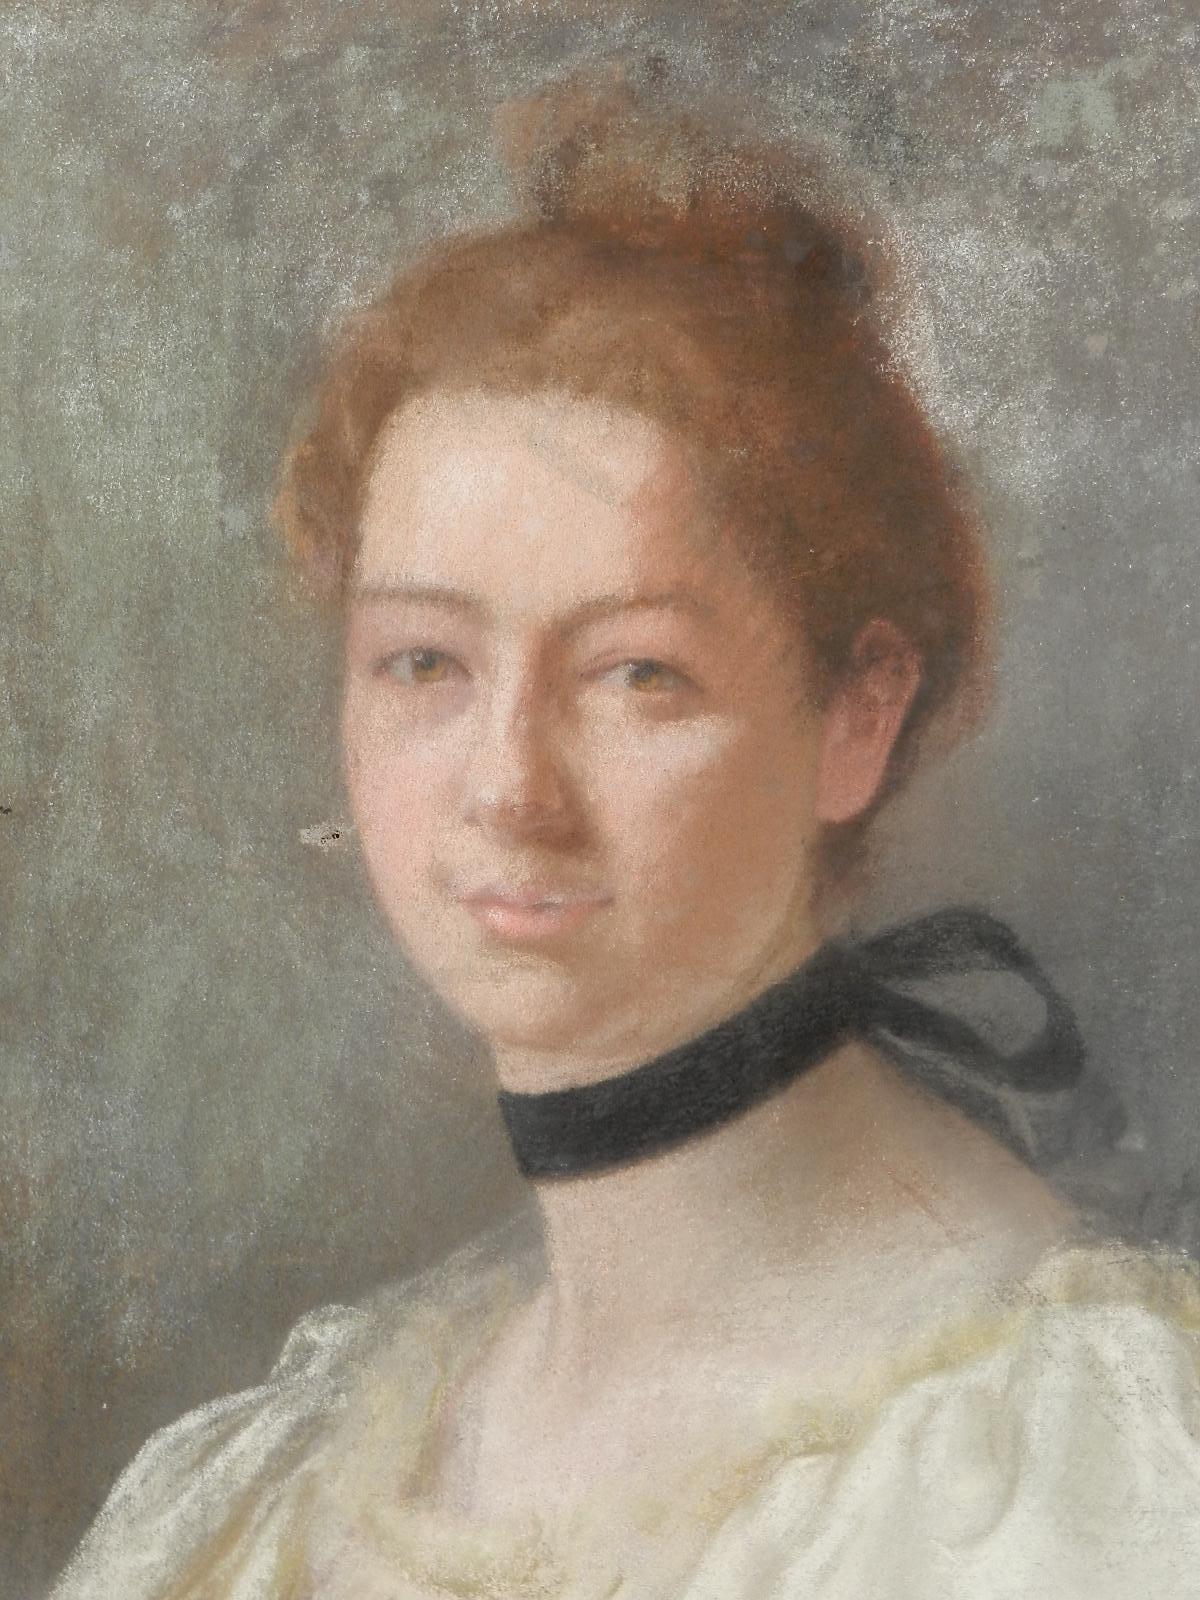 Portrait of a Lady French 19th Century Painting Pastel on Canvas  For Sale 1